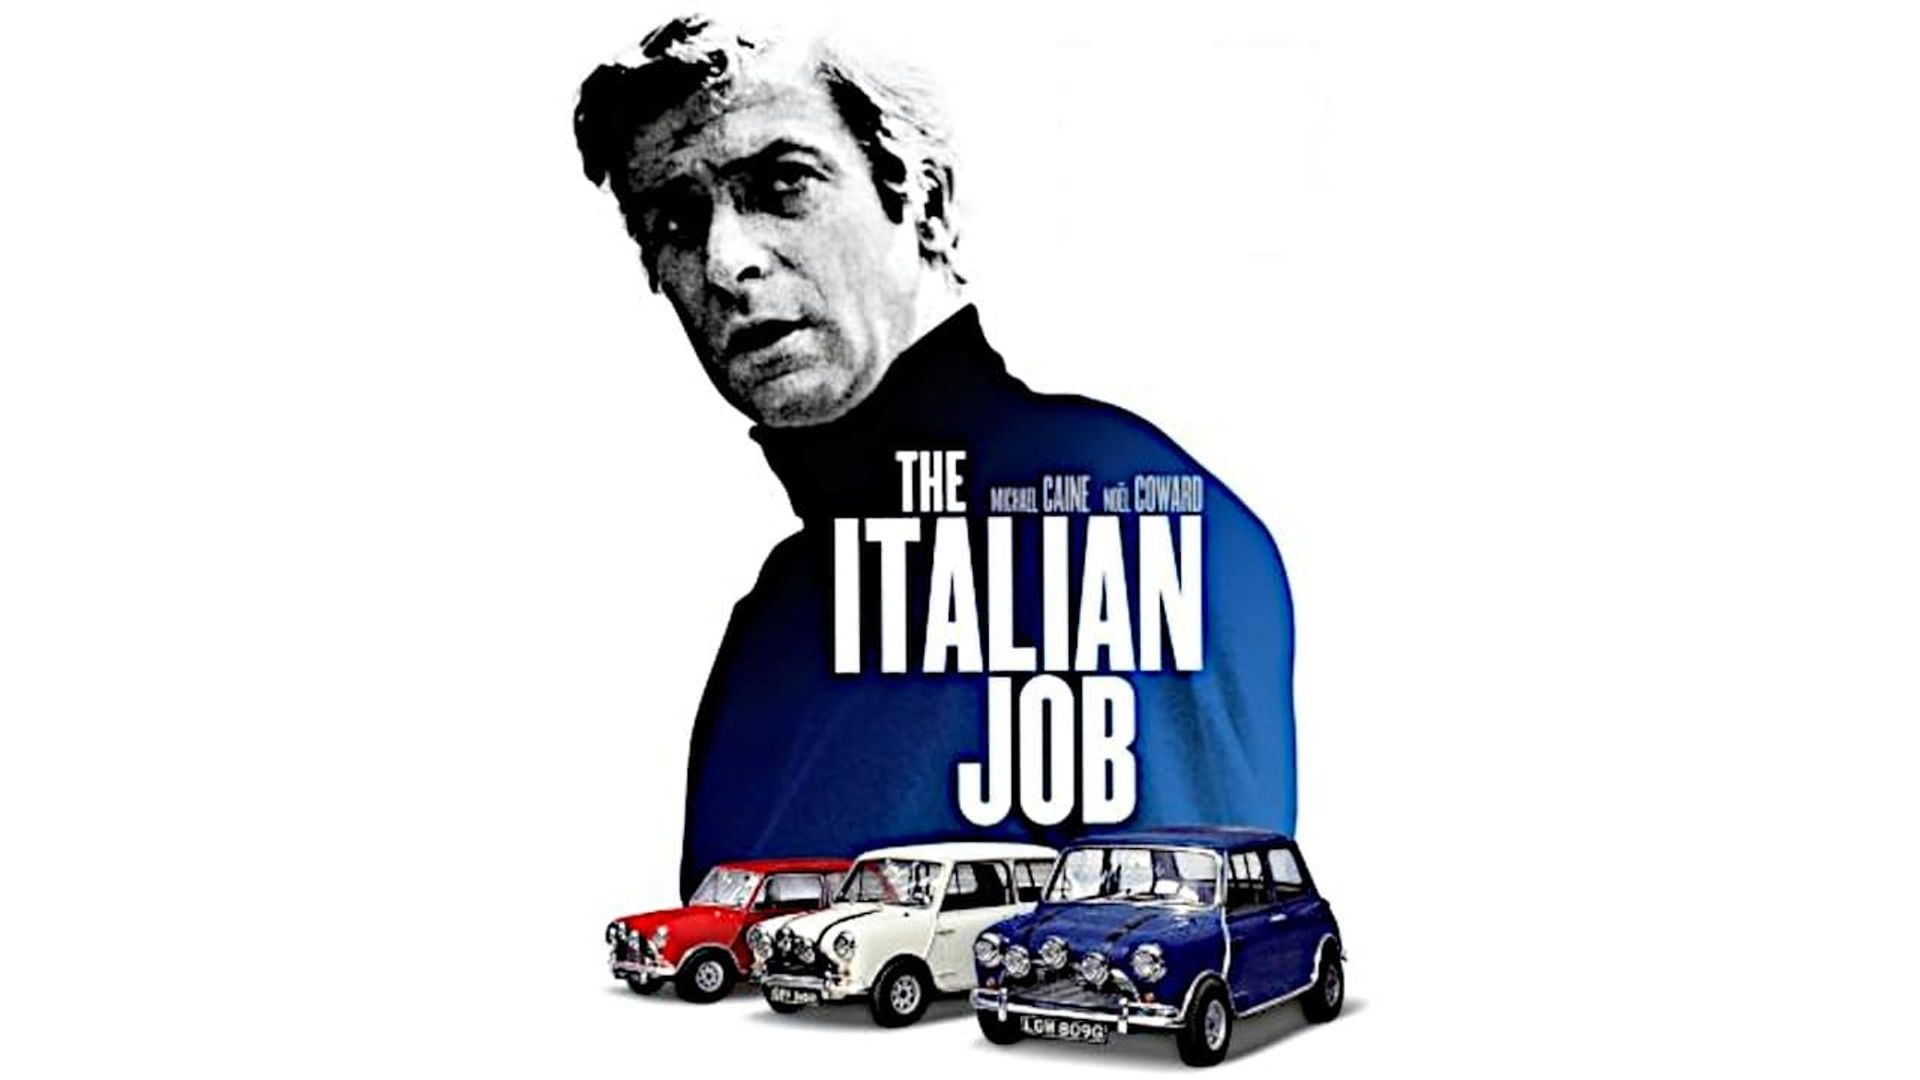 The Making of 'The Italian Job' background